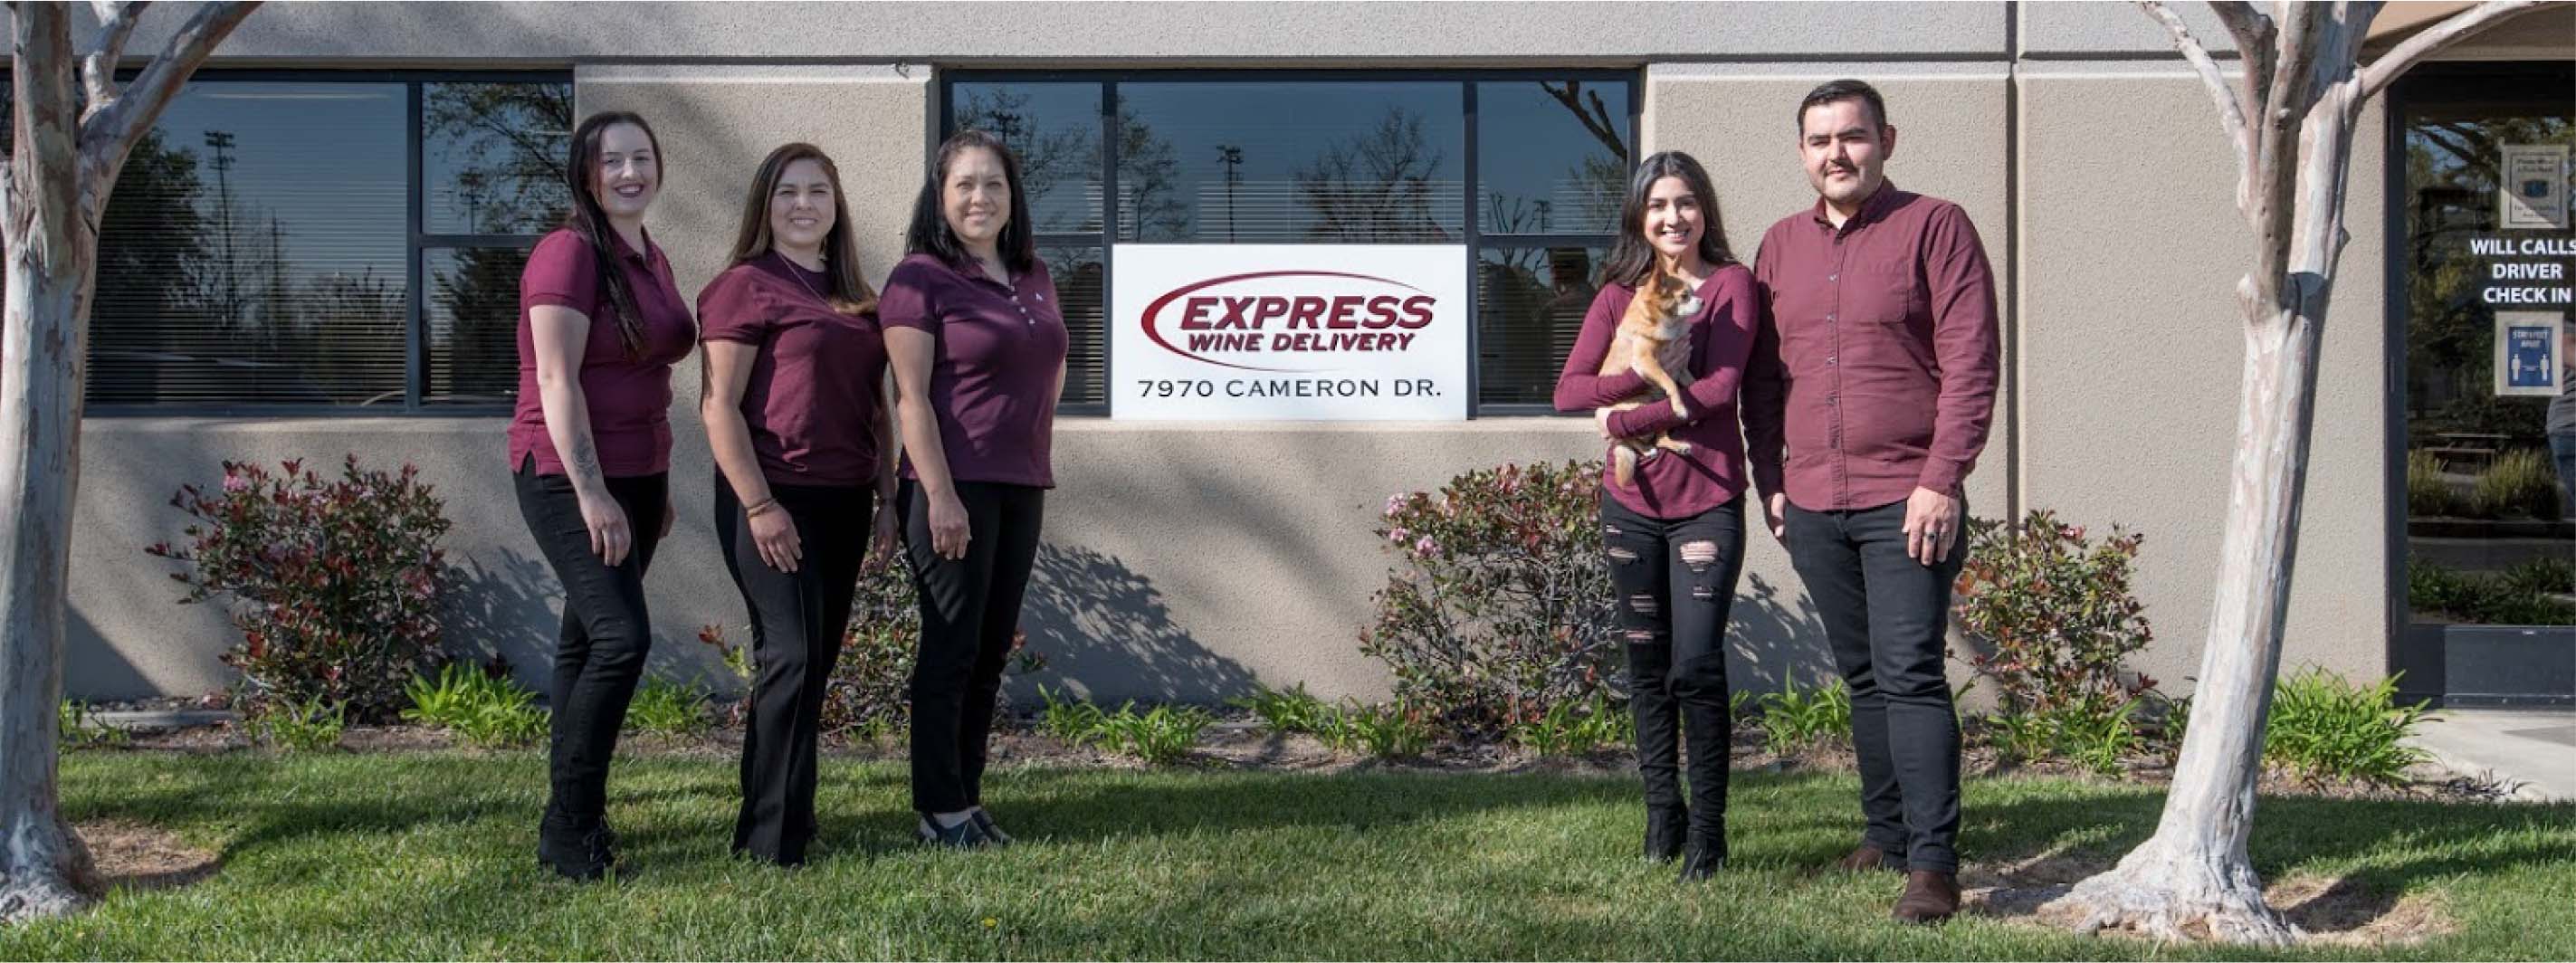 Staff members posing in front of Express Wine Delivery building